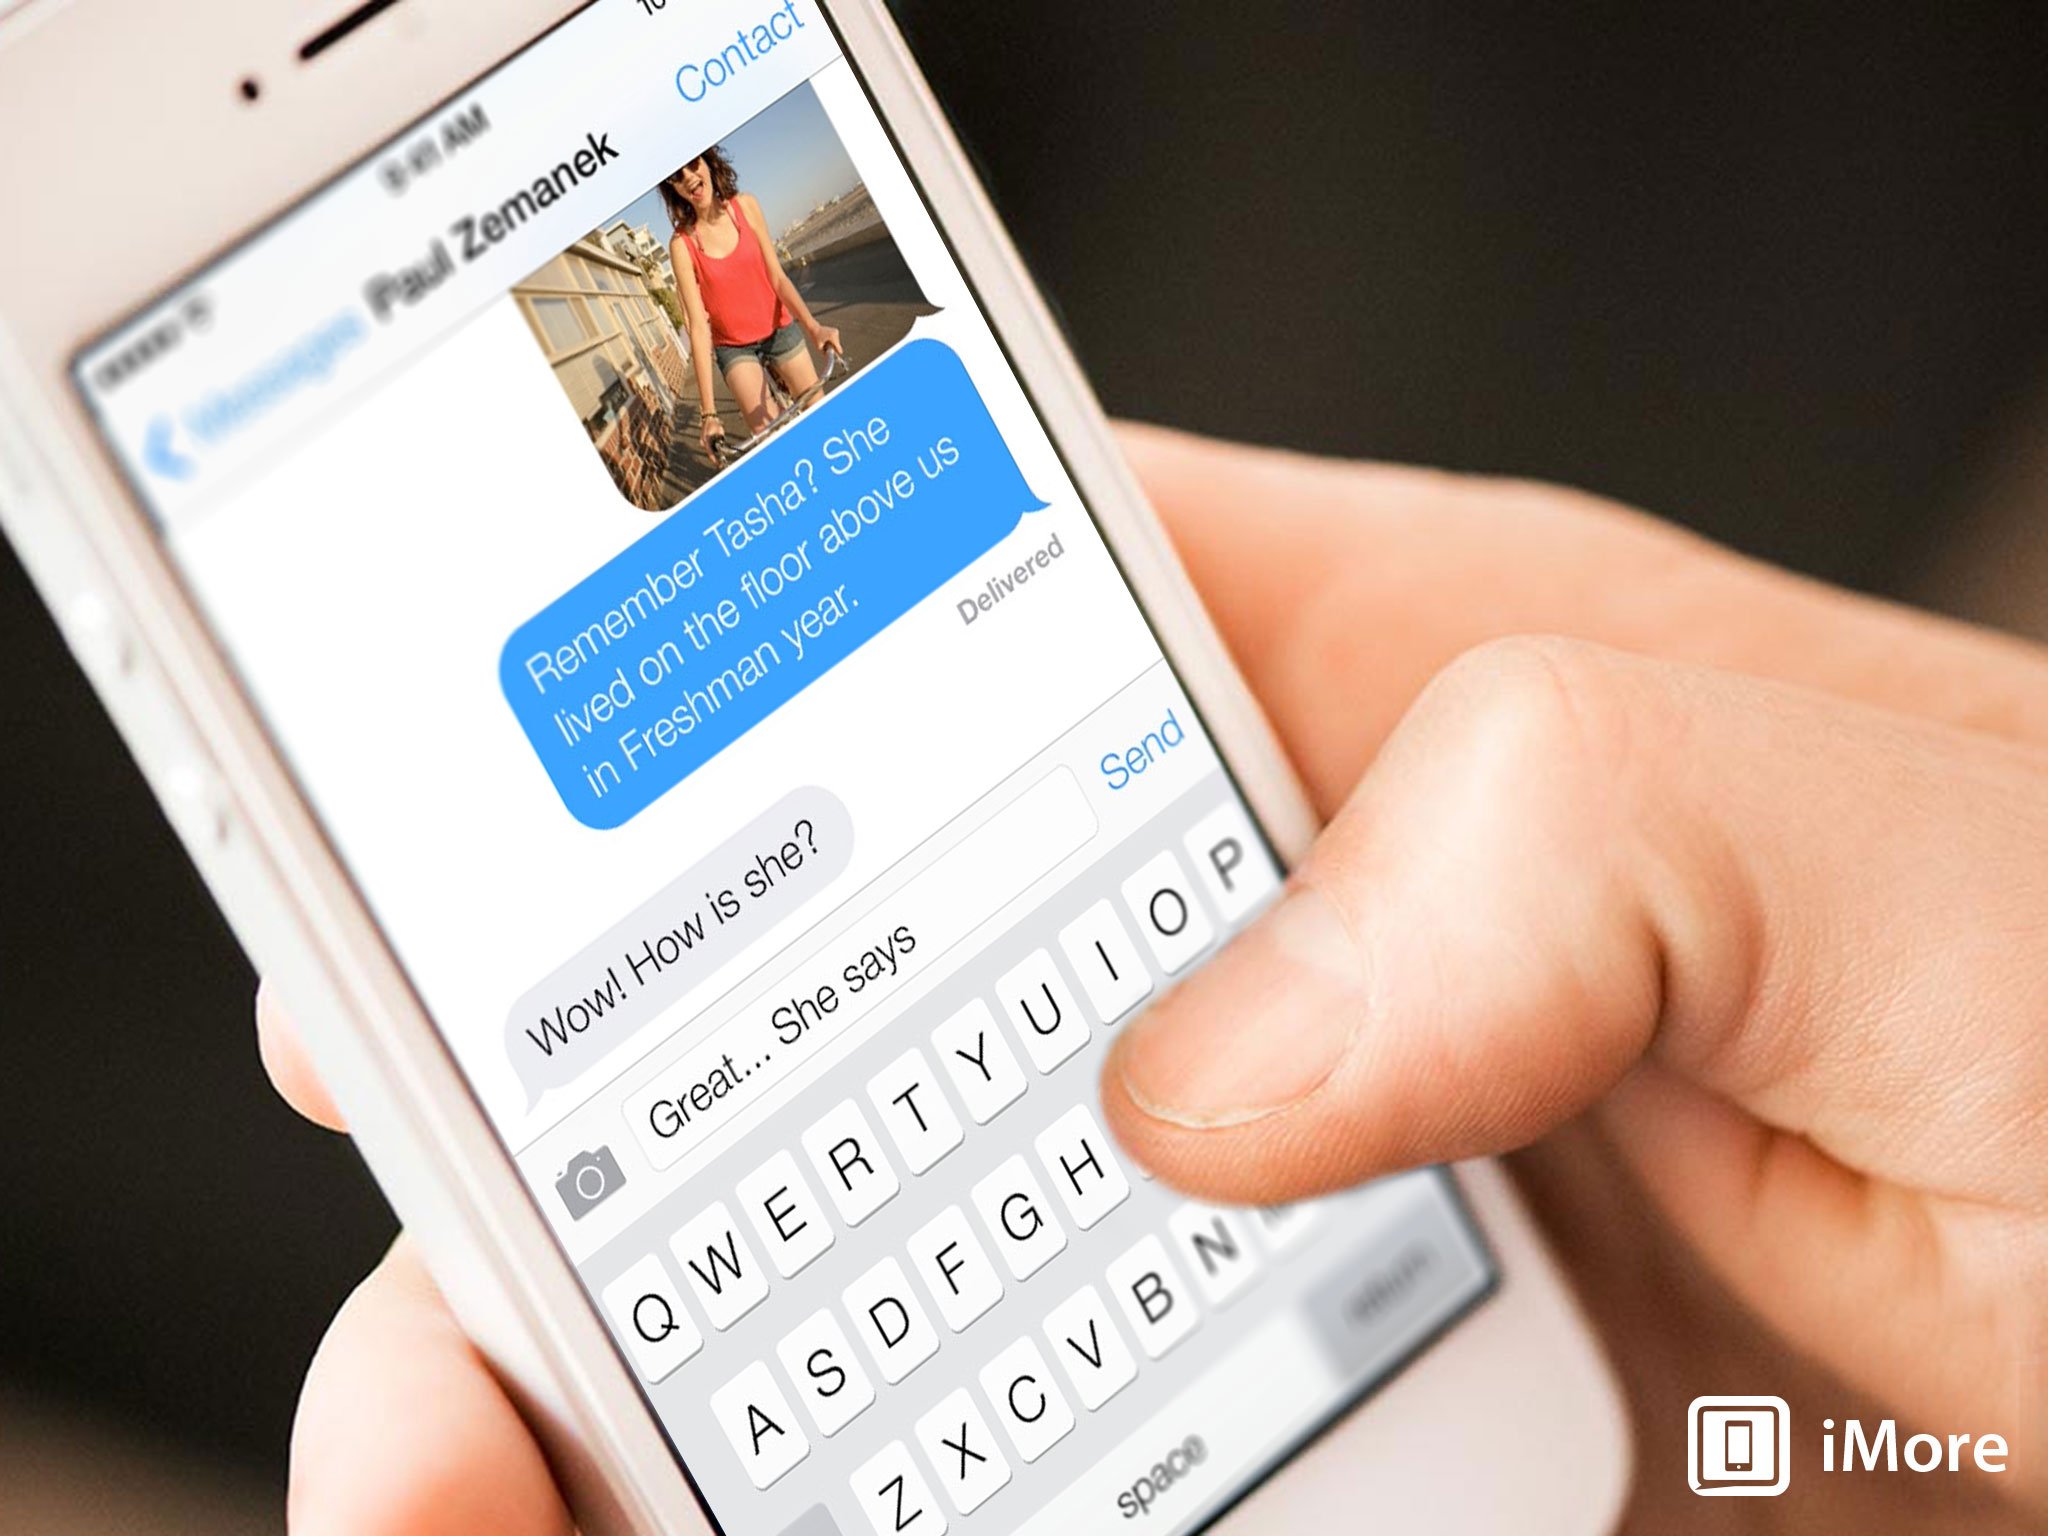 Apple being sued because someone forgot to turn off iMessage when they